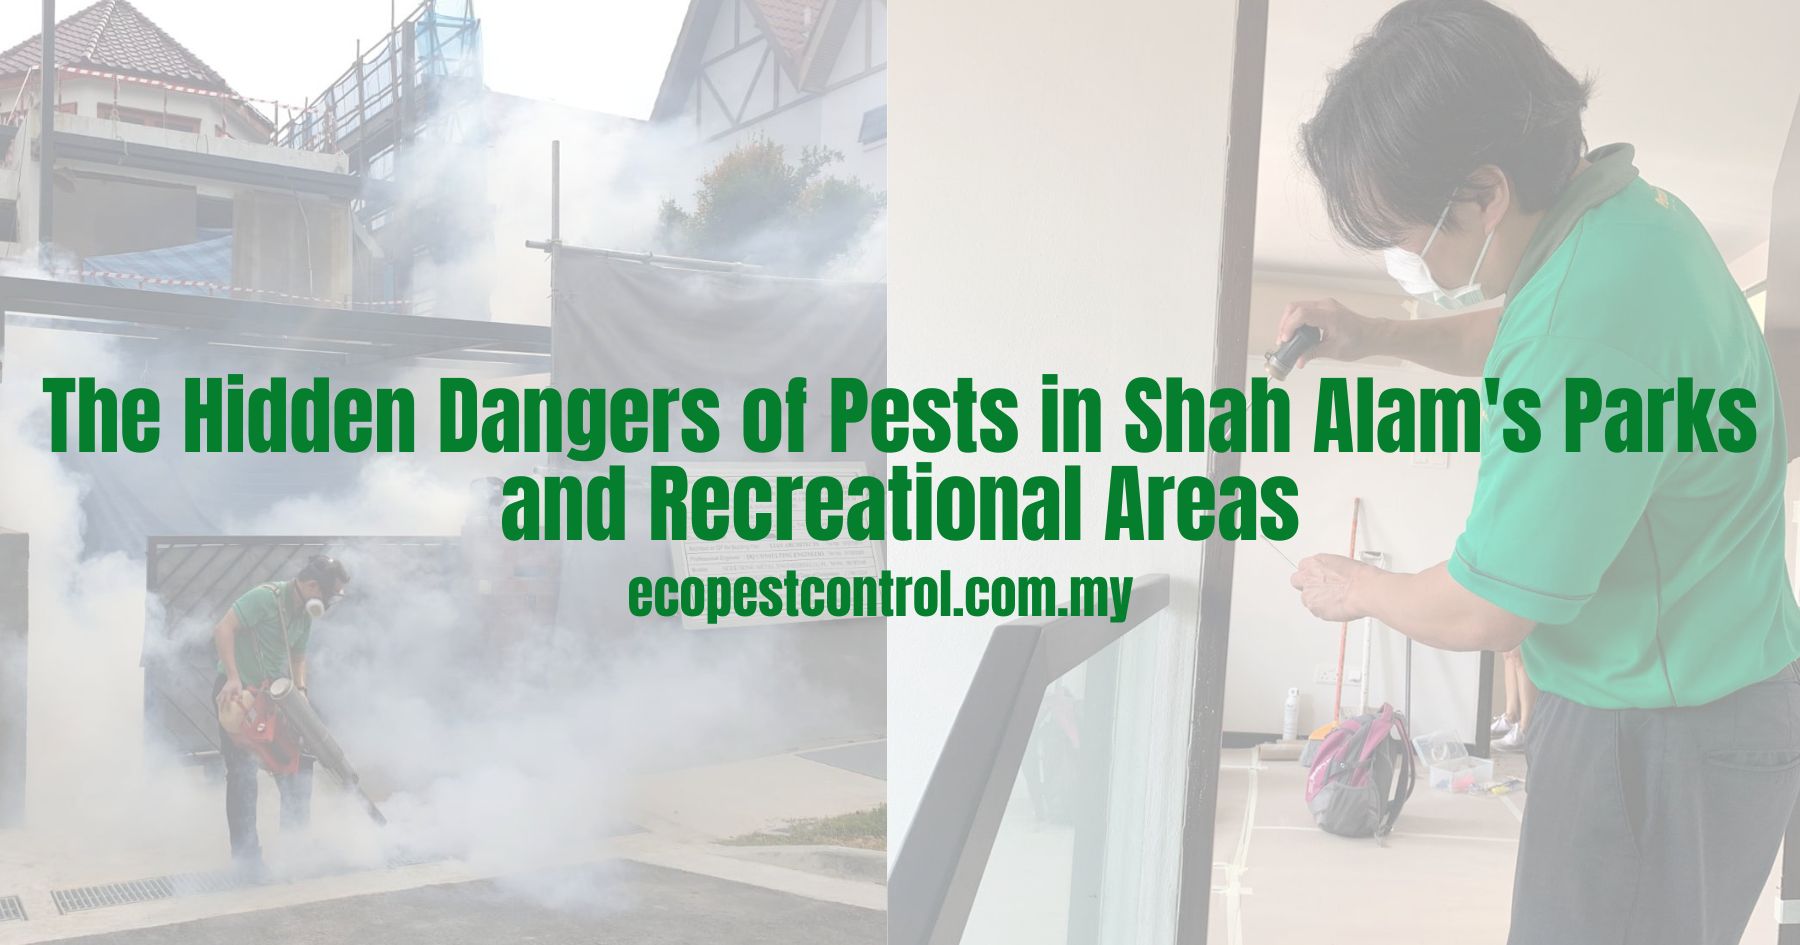 The Hidden Dangers of Pests in Shah Alam's Parks and Recreational Areas